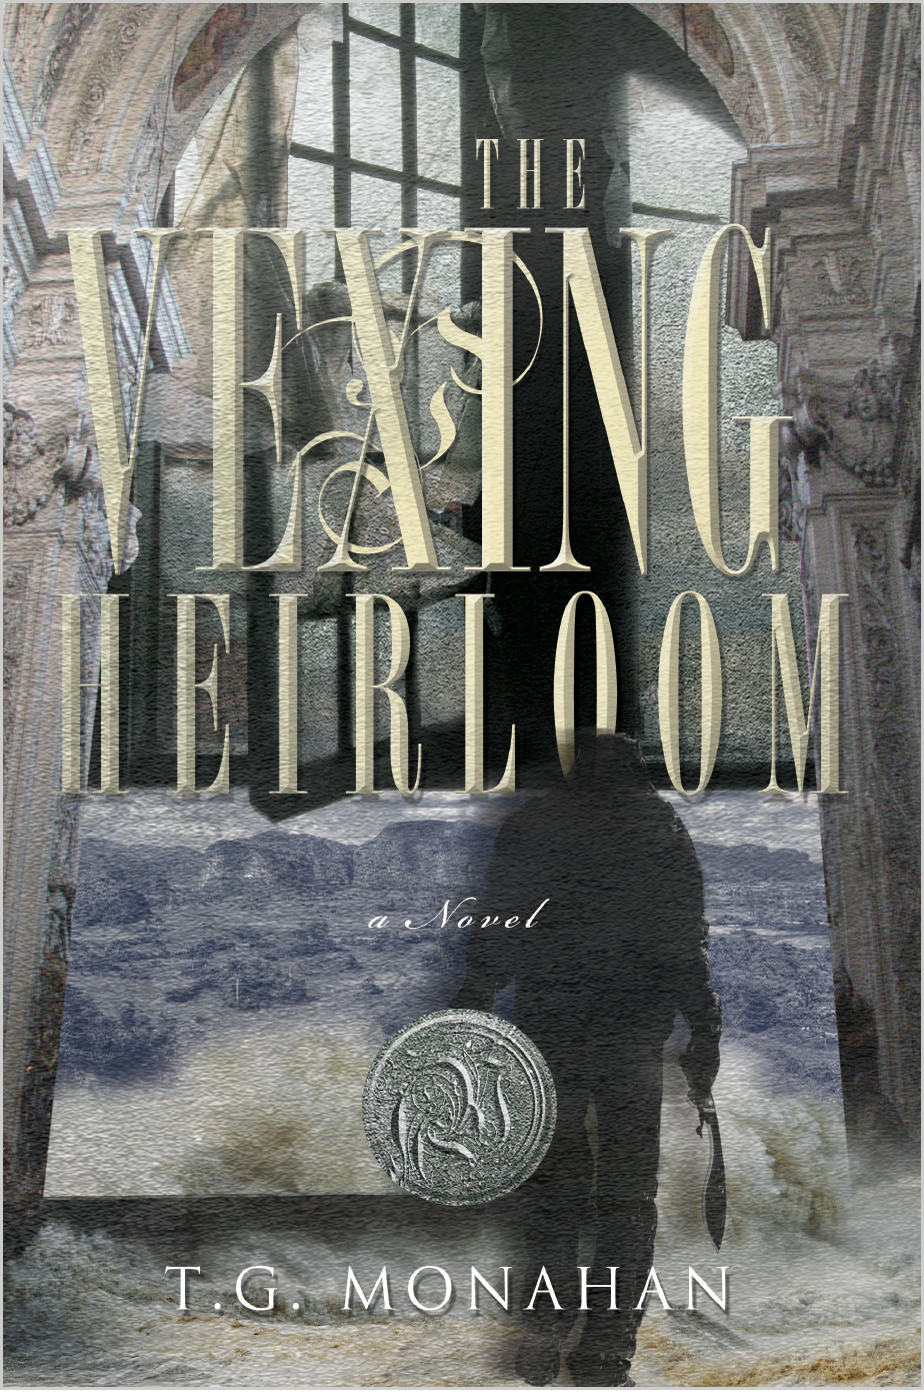 The Vexing Heirloom by T.G. Monahan